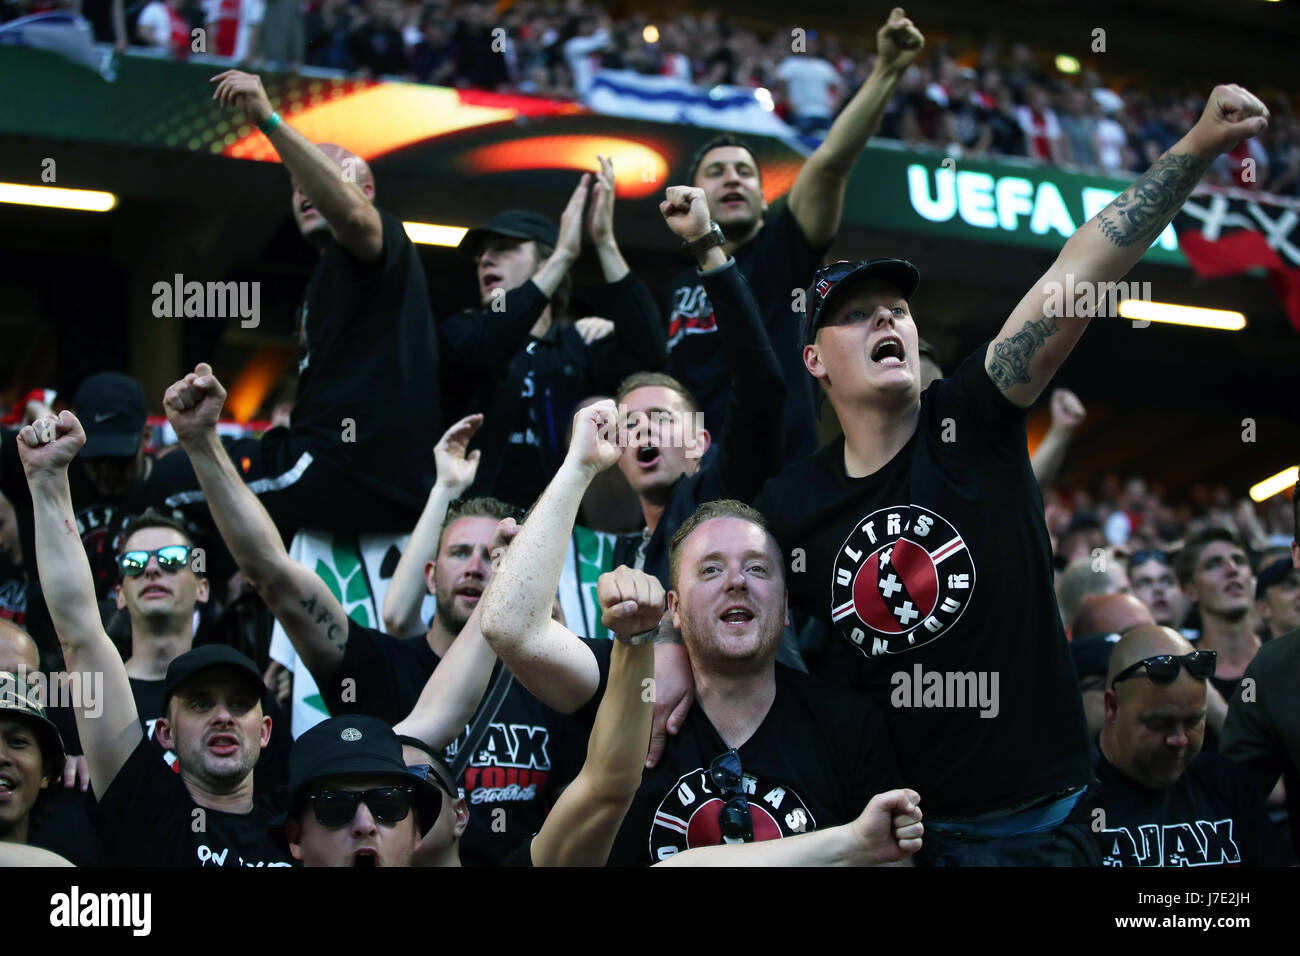 Ajax Fans In The Stands Before The Uefa Europa League Final At The Friends Arena In Stockholm 